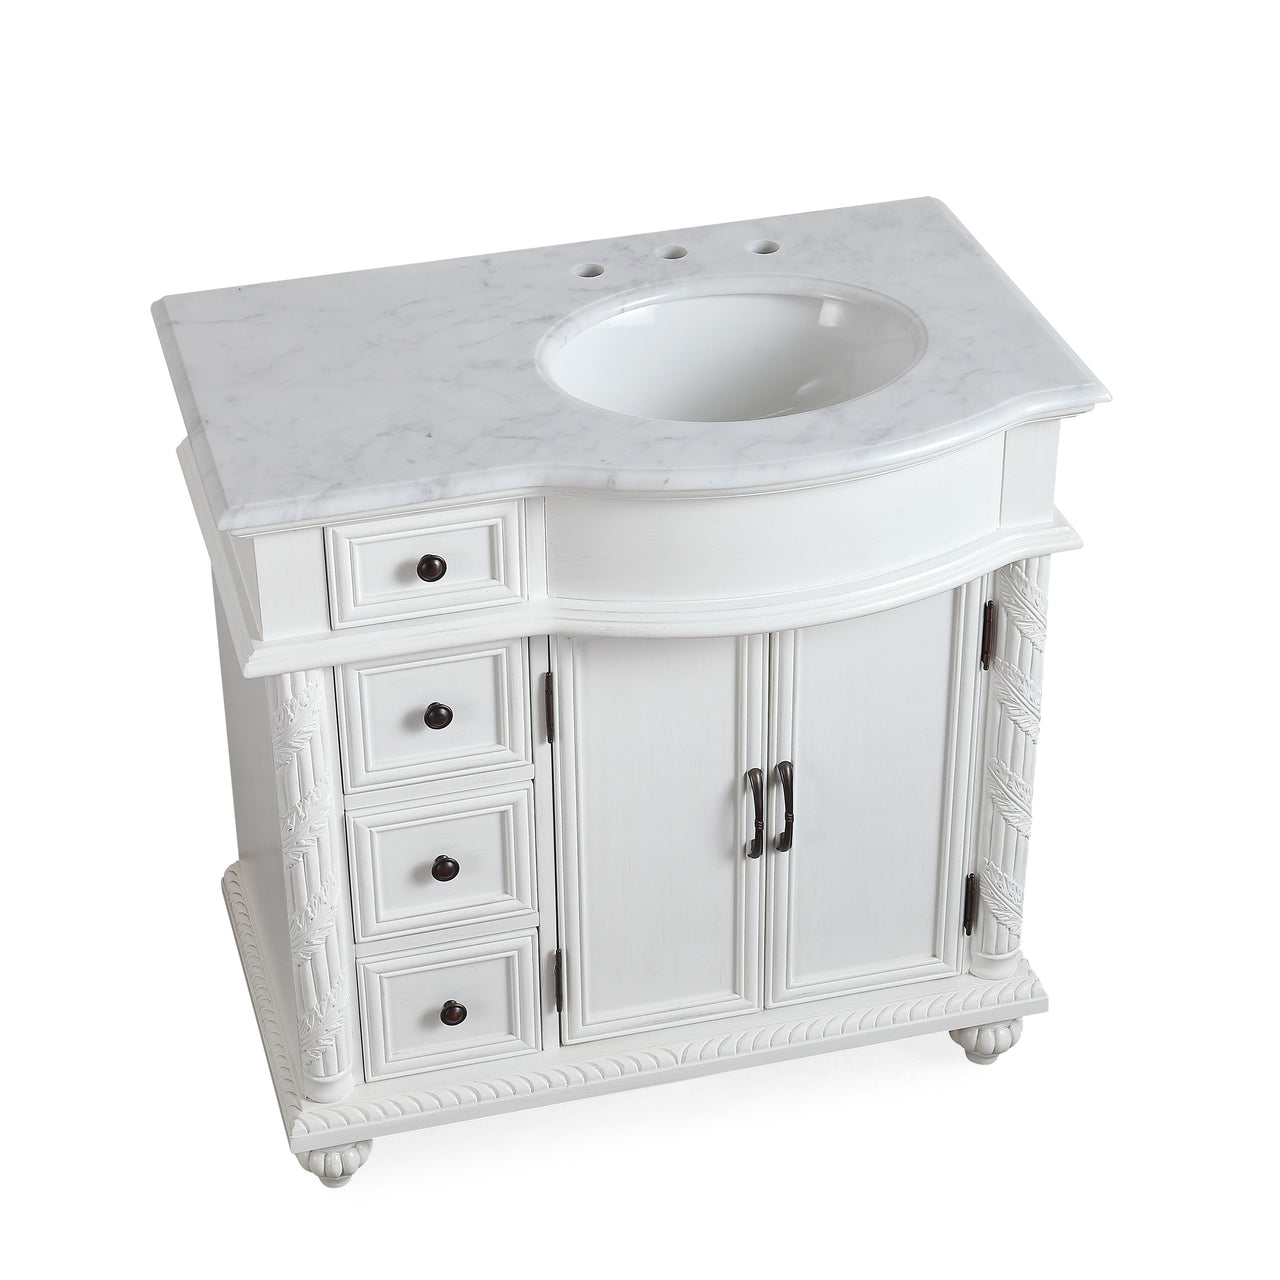 SilkRoad 36" Single (Right) Sink White Cabinet - Carrara White Marble Top, Ceramic Sink (3-hole)..